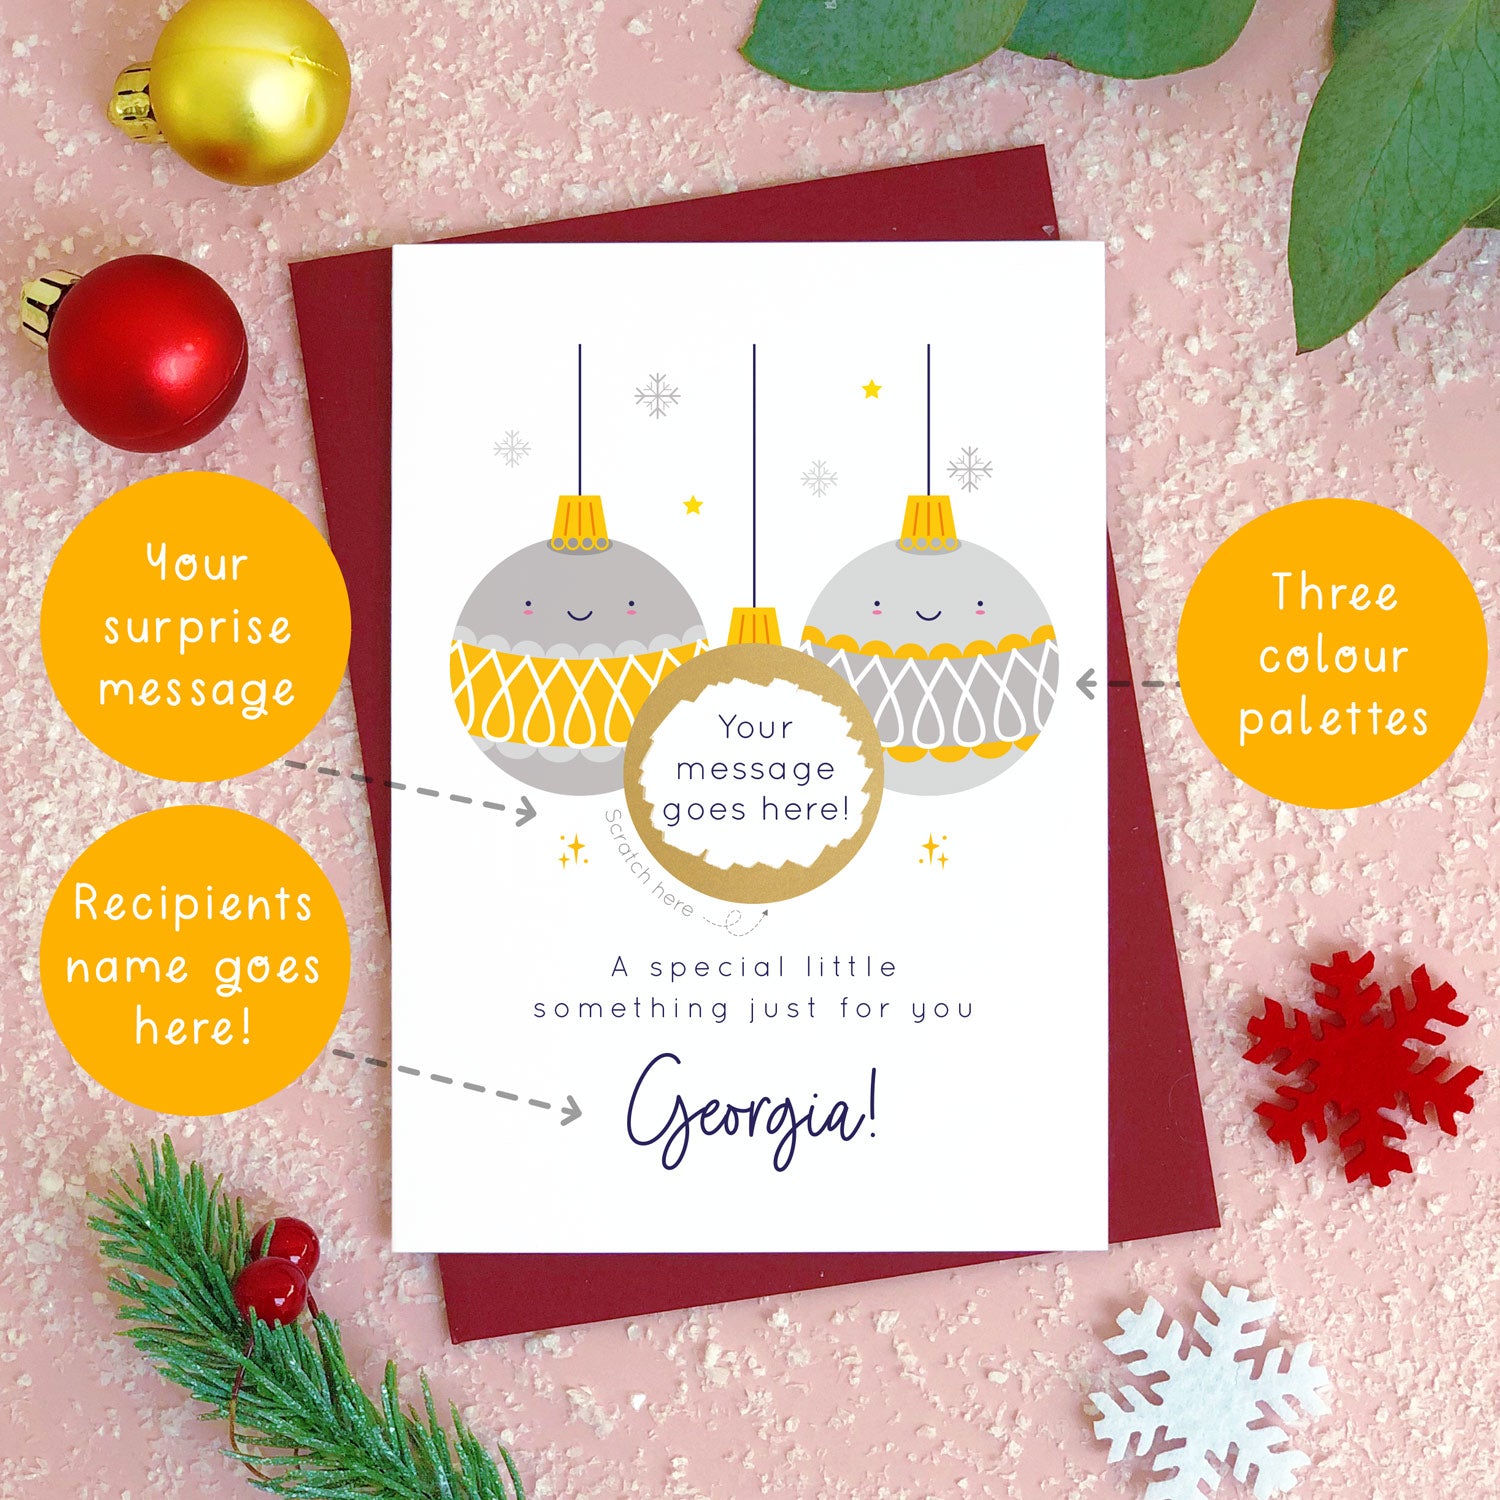 A personalised Christmas bauble scratch card photographed flat lying on a red wine coloured envelope on a pink surface surrounded by fake snow, baubles and foliage. The card is the grey and yellow bauble version. The orange circles demonstrate which areas of the card can be personalised. Here they point to the colour options, message and name for the front of the card.